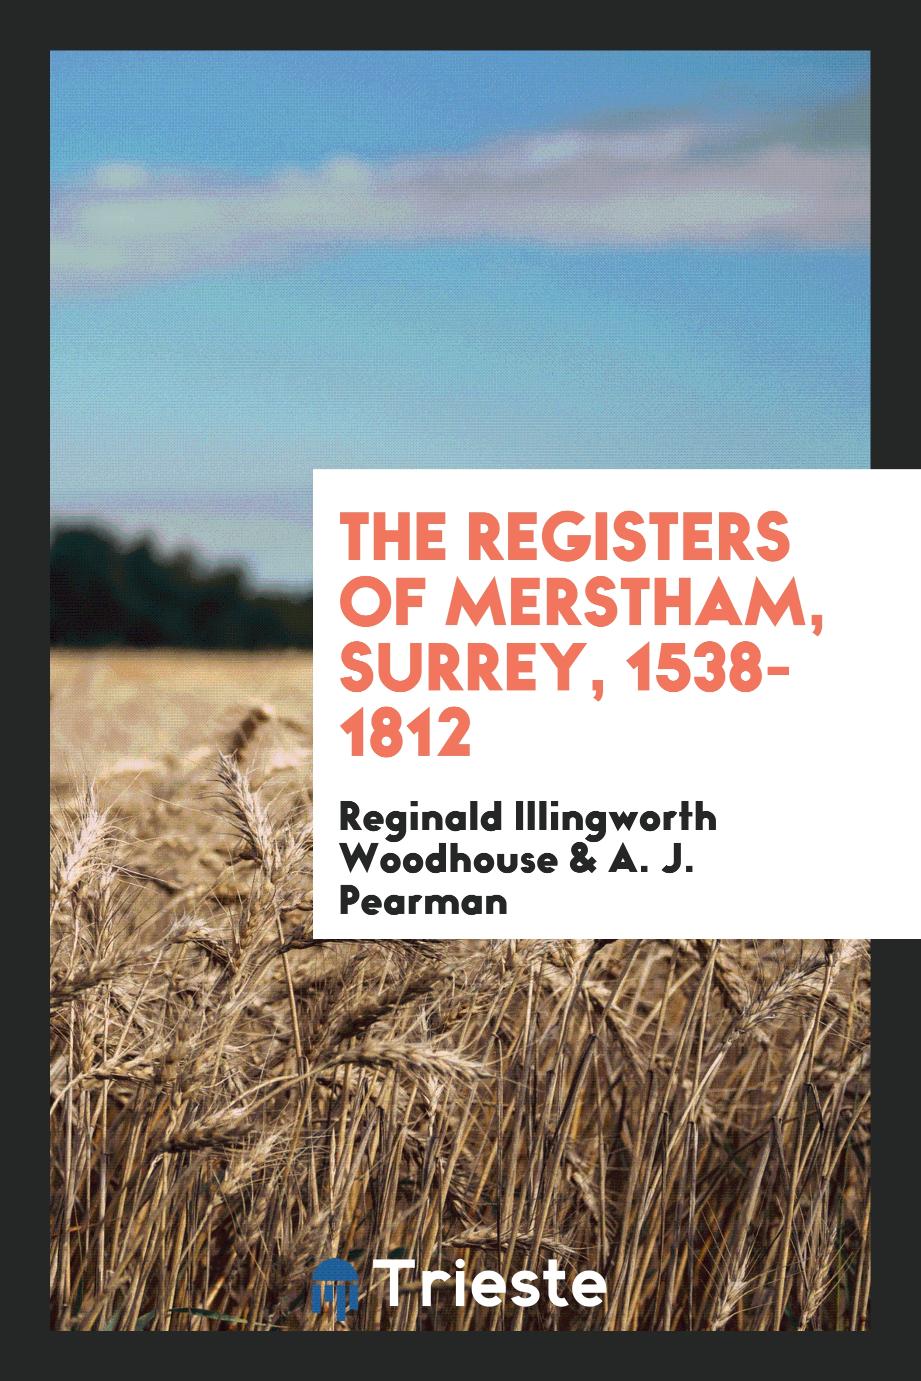 The Registers of Merstham, Surrey, 1538-1812